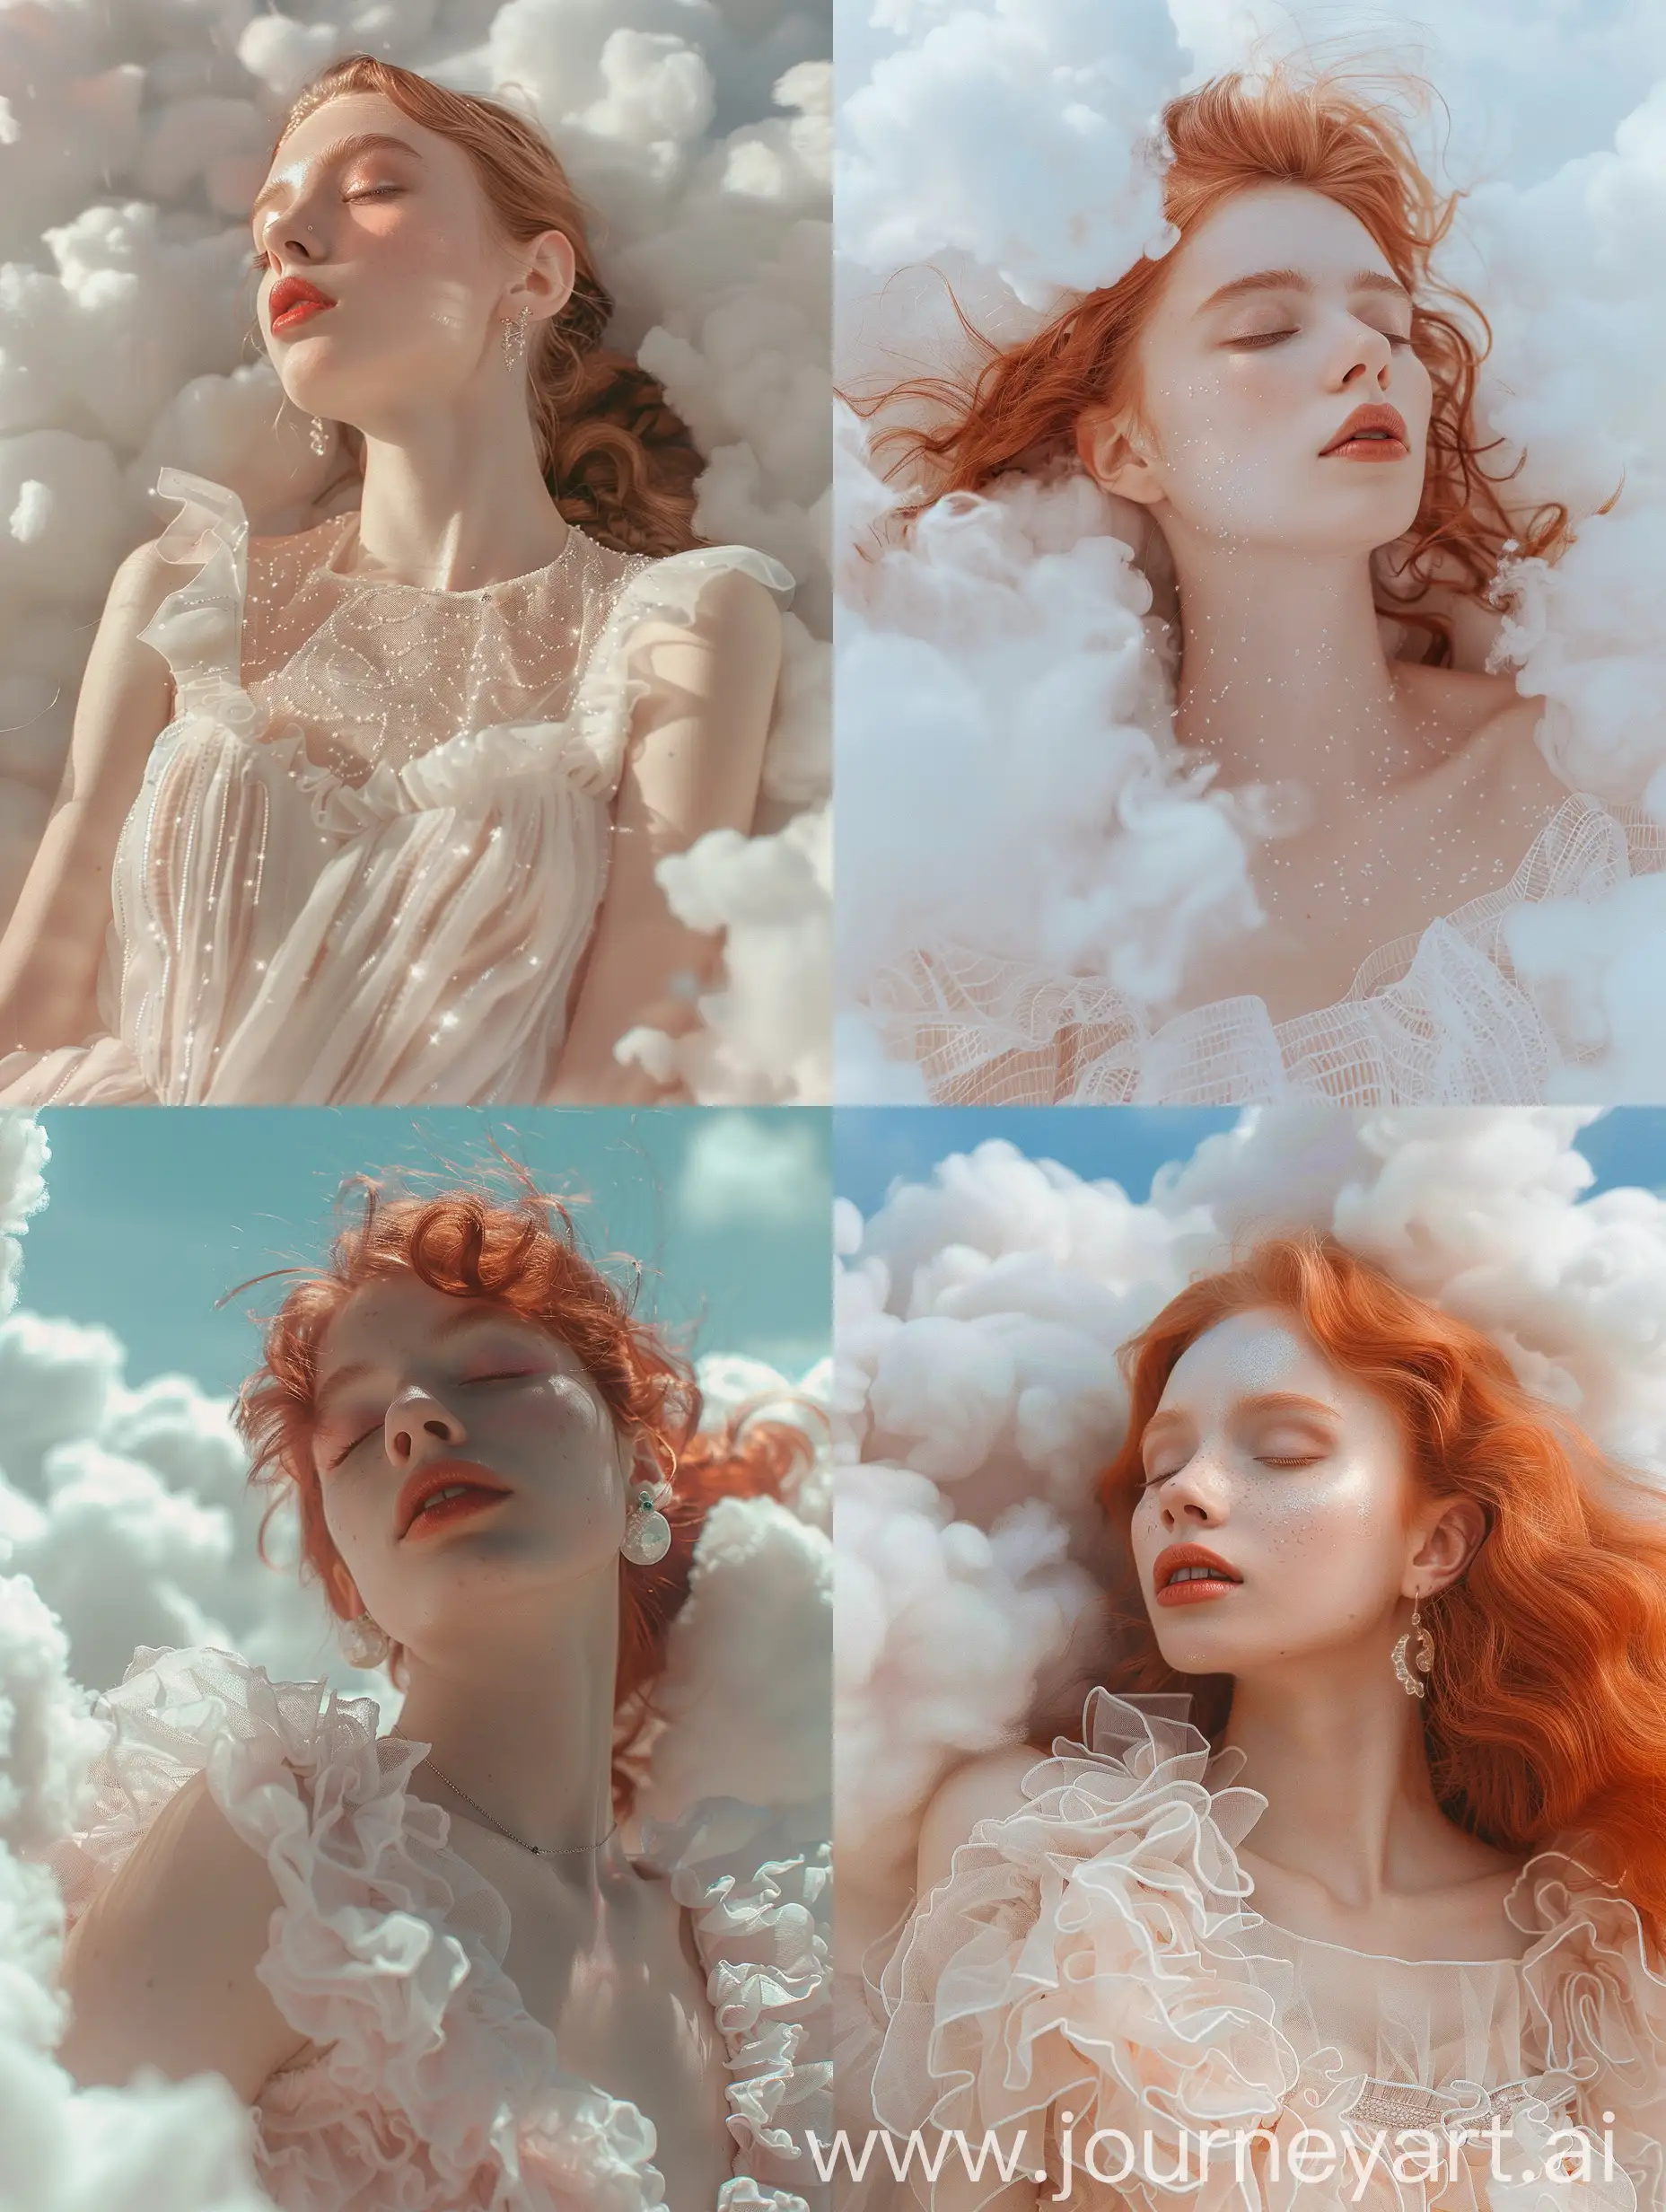 Divine-RedHaired-Girl-Among-Soft-Pastel-Clouds